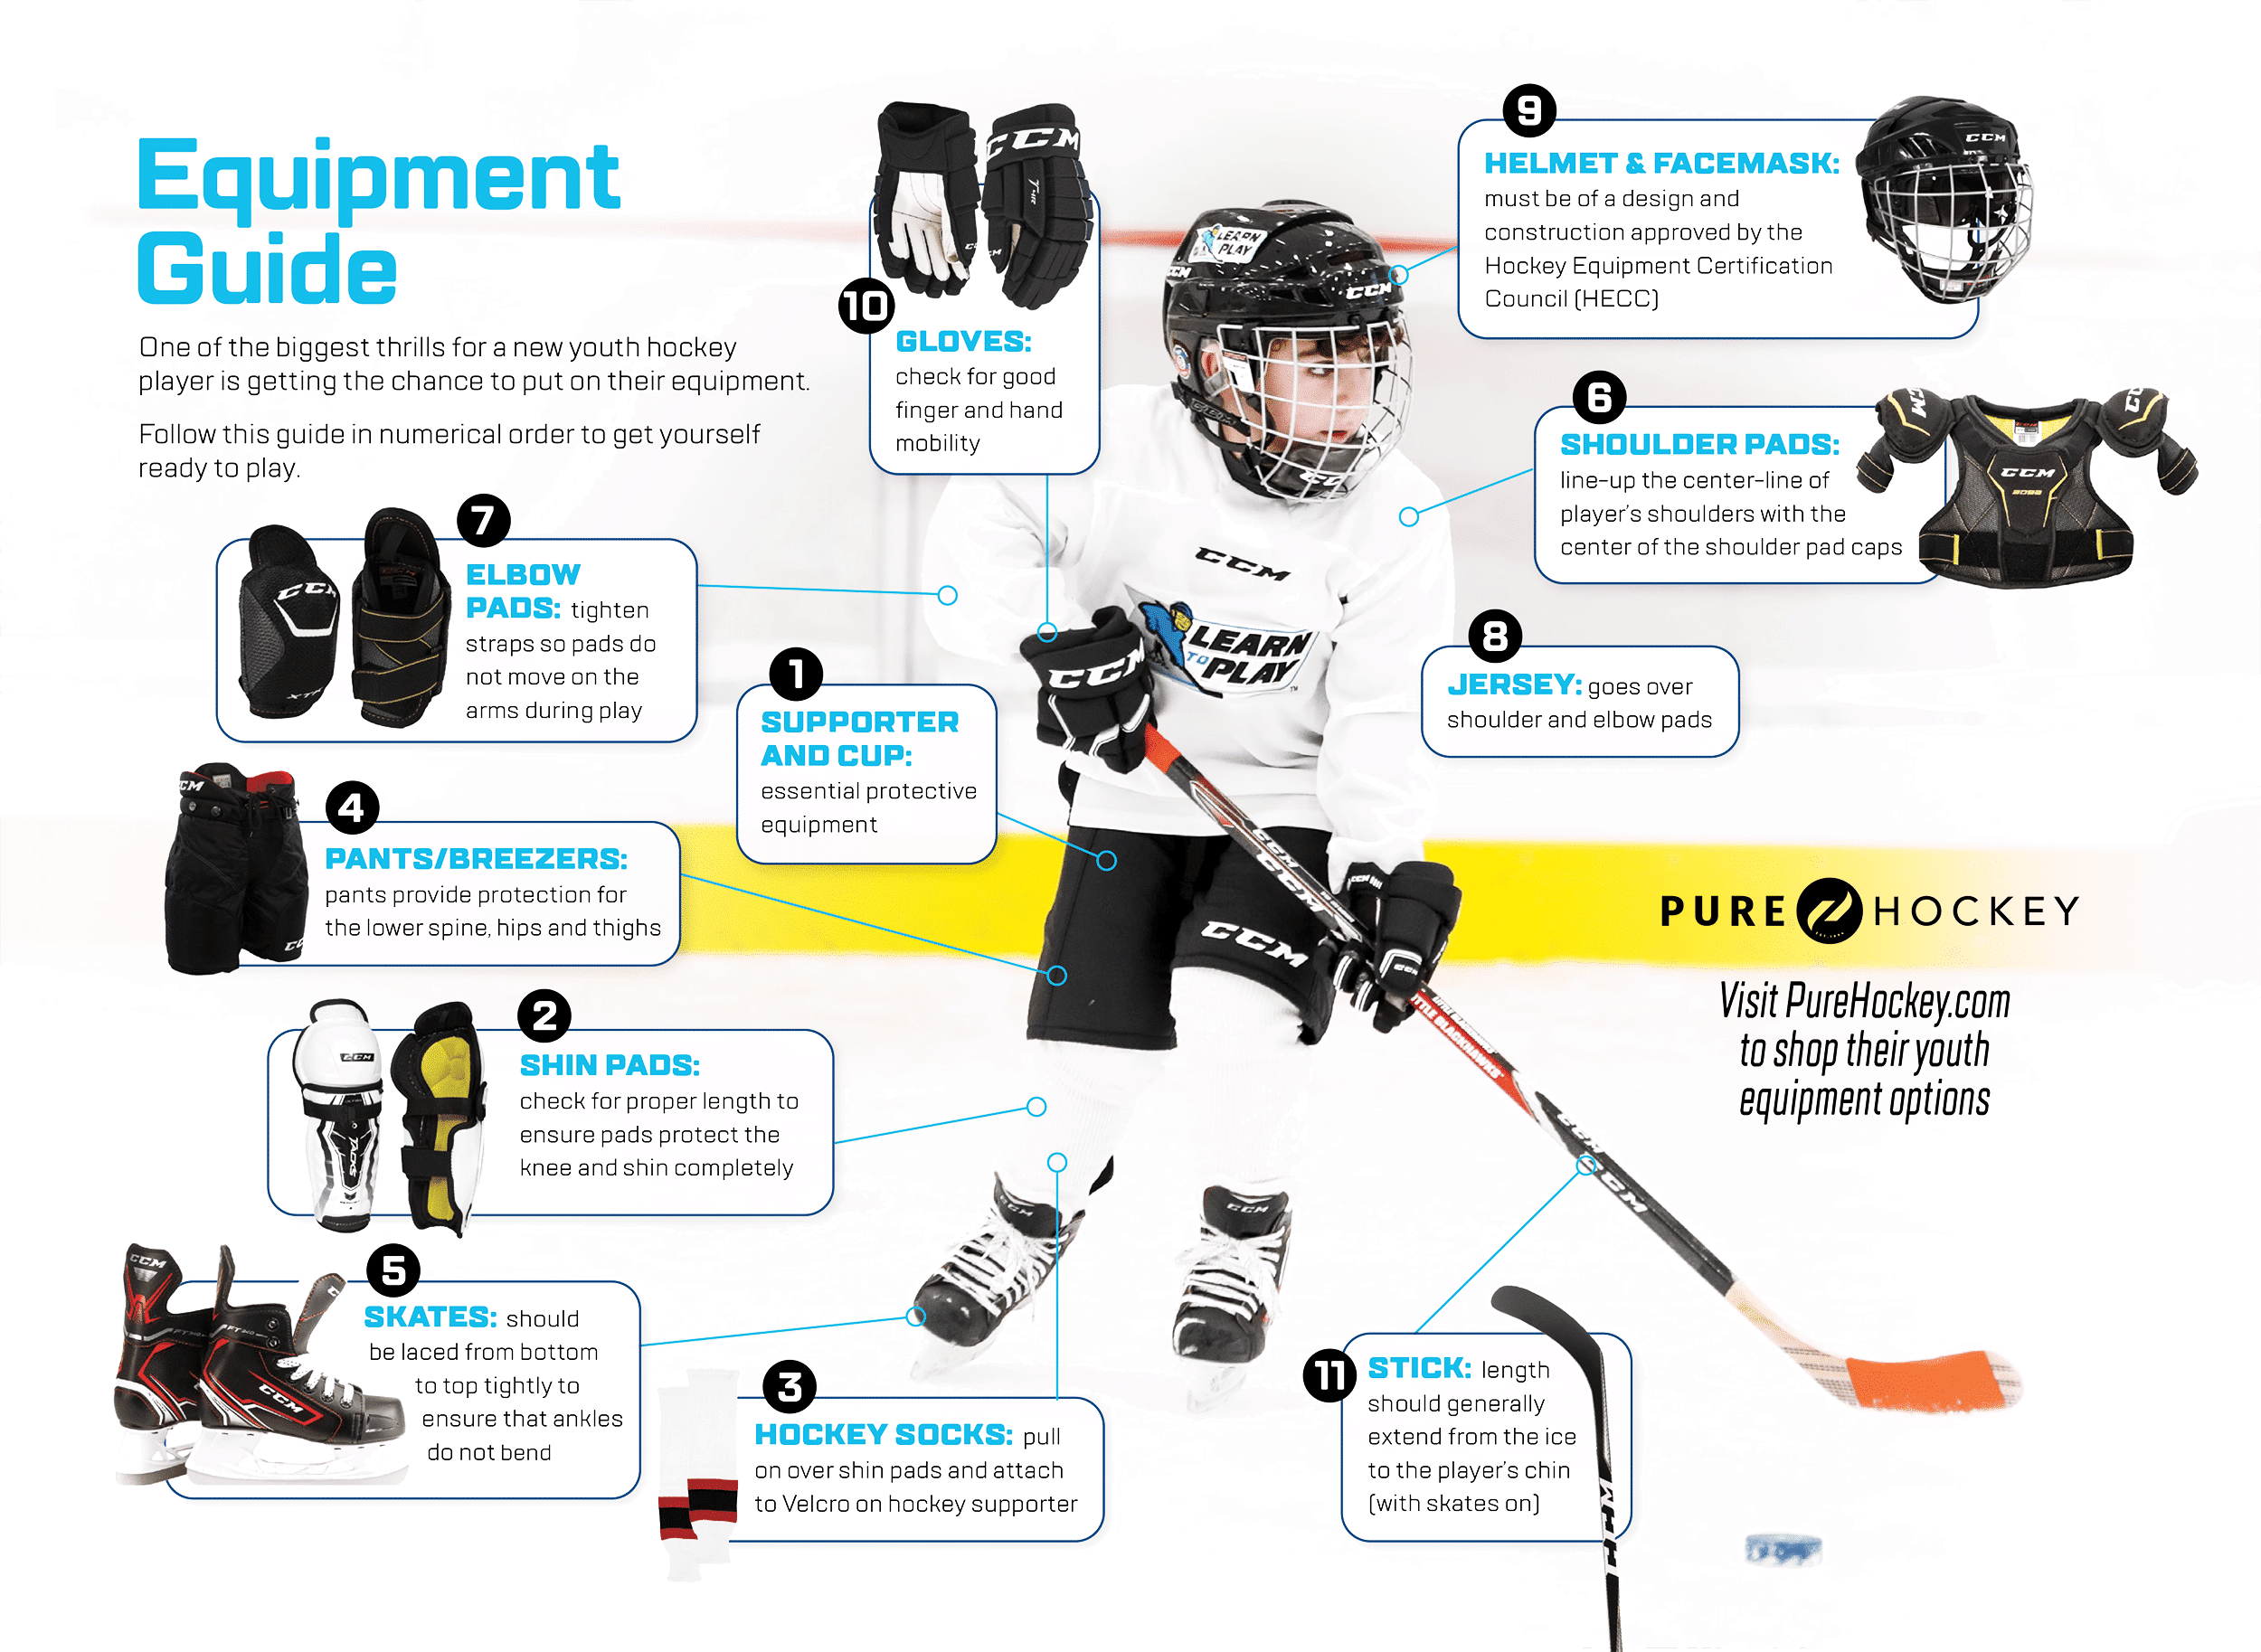 What Safety Gear Should I Wear While Inline Skating?